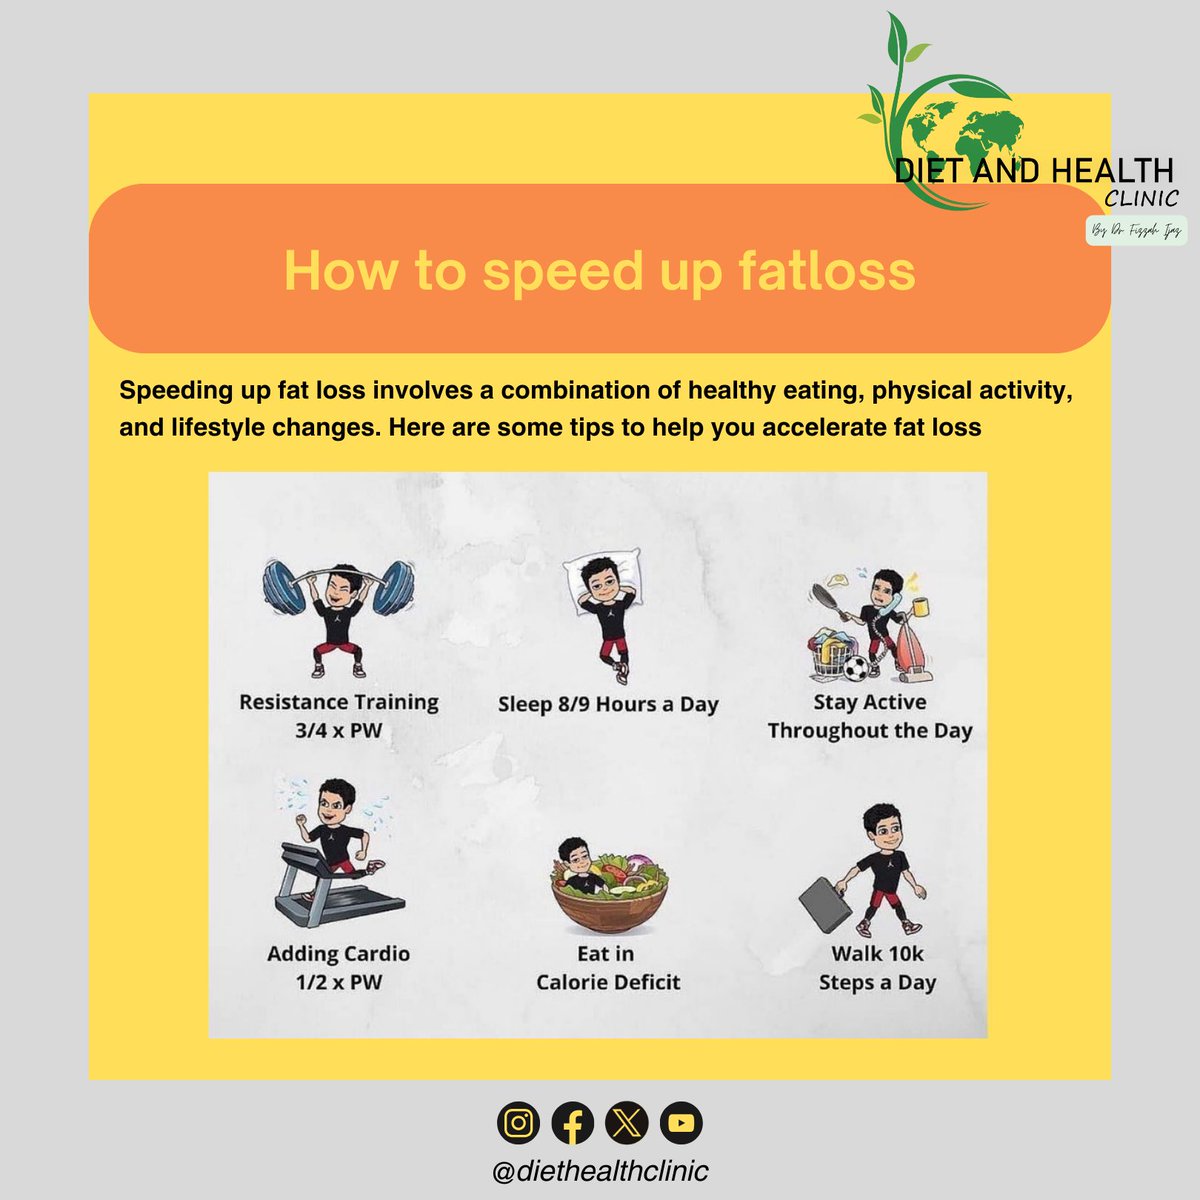 Boosting fat loss: eat right, move more, and stay consistent! 💪
#HealthyChoices #FitnessGoals #fatlosstips